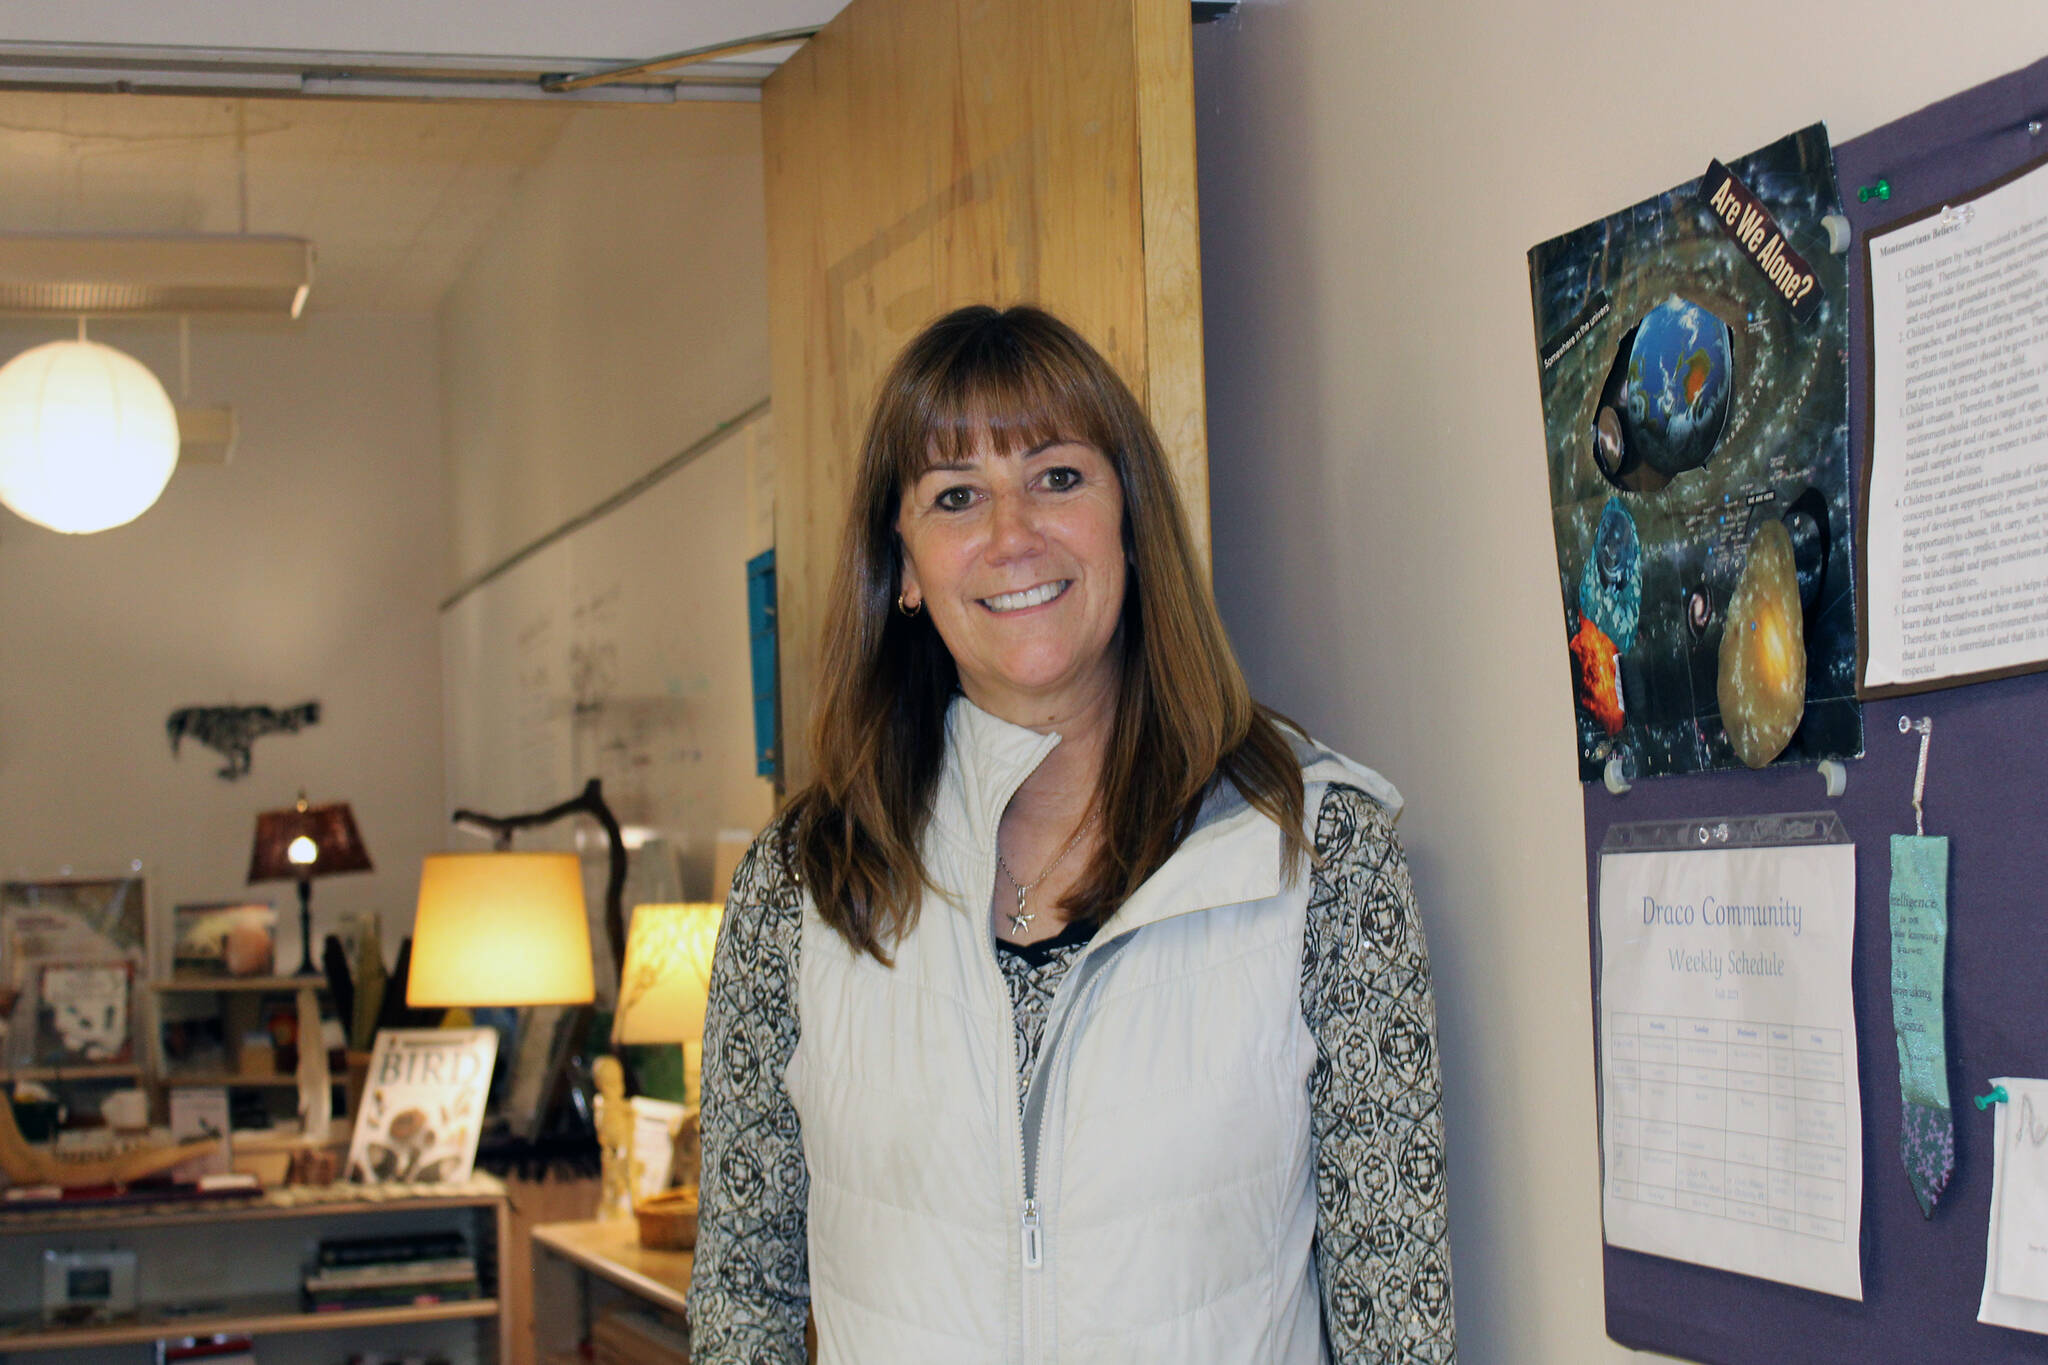 On Sept. 27, Bridget Weiss, superintendent of Juneau Public Schools, stood outside the classroom of former math teacher and basketball coach Bill Szepanski, who inspired her to pursue a degree in education and a teaching and coaching career. Later this week, Weiss will accept the 2022 Alaska Superintendent of the year award in Anchorage. (Dana Zigmund/Juneau Empire)